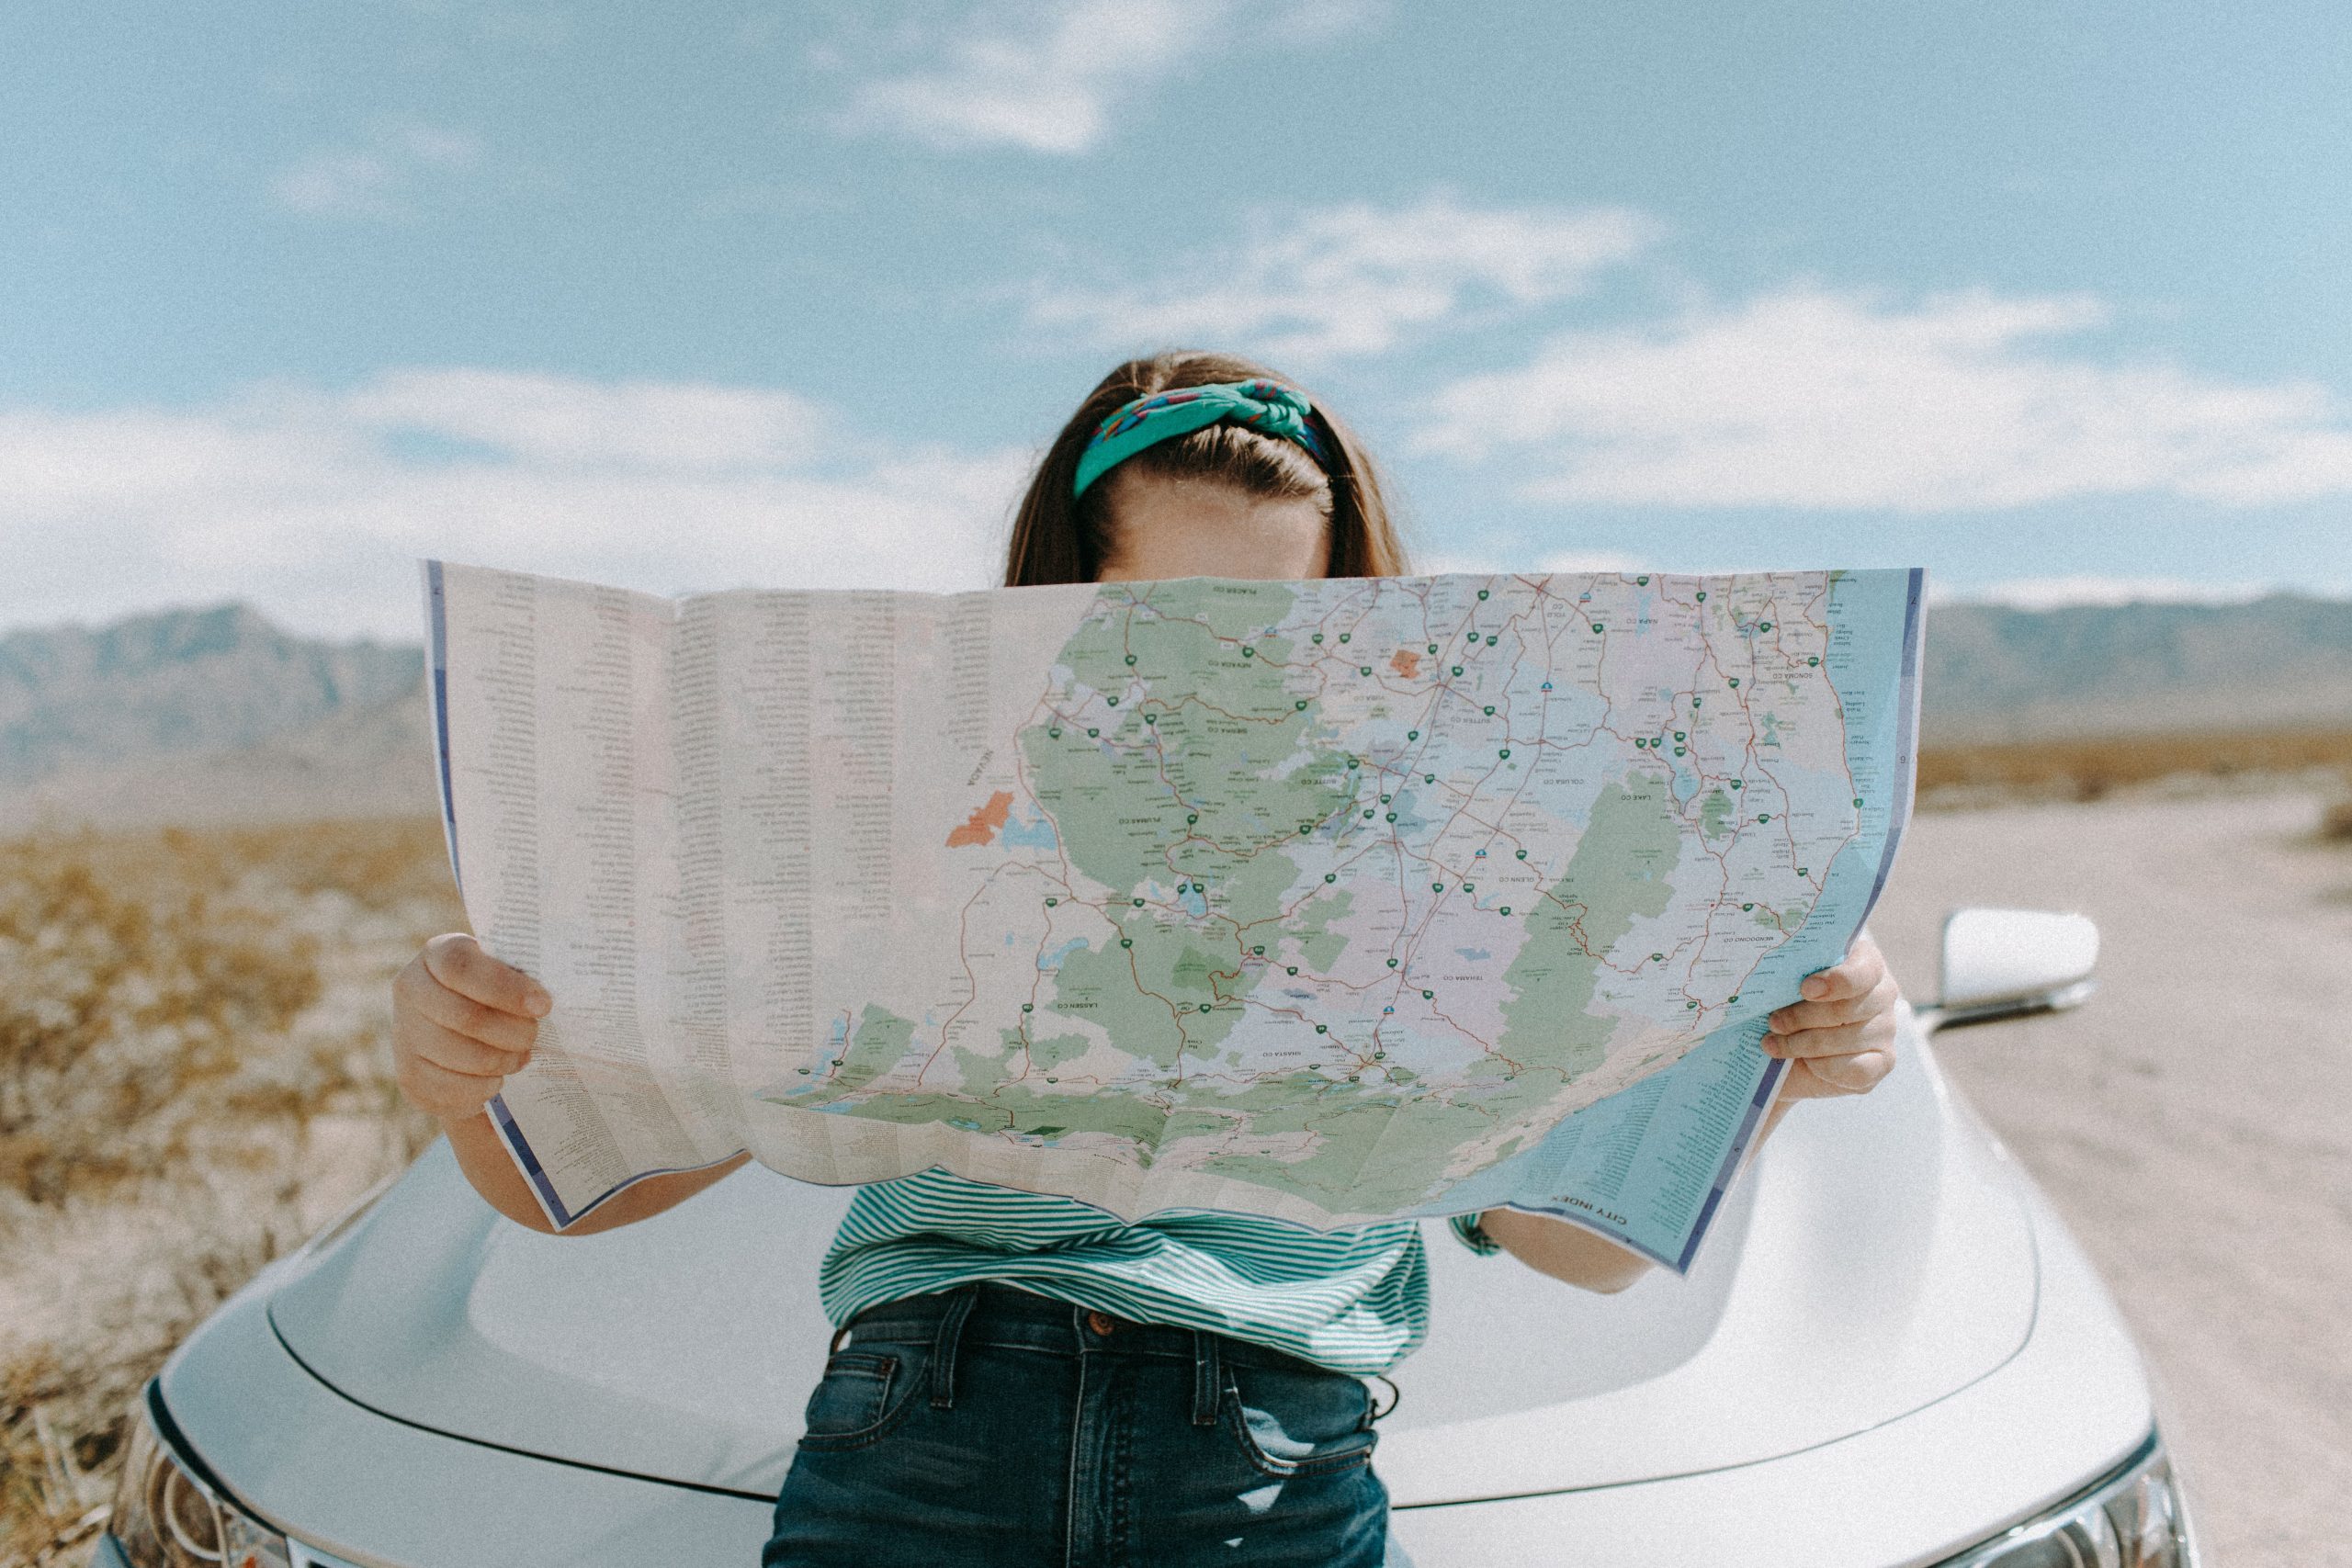 In an article that gives tips on traveling the world as a broke college student is a photograph a woman holding a roadmap and standing outside of her white car on a desert road.